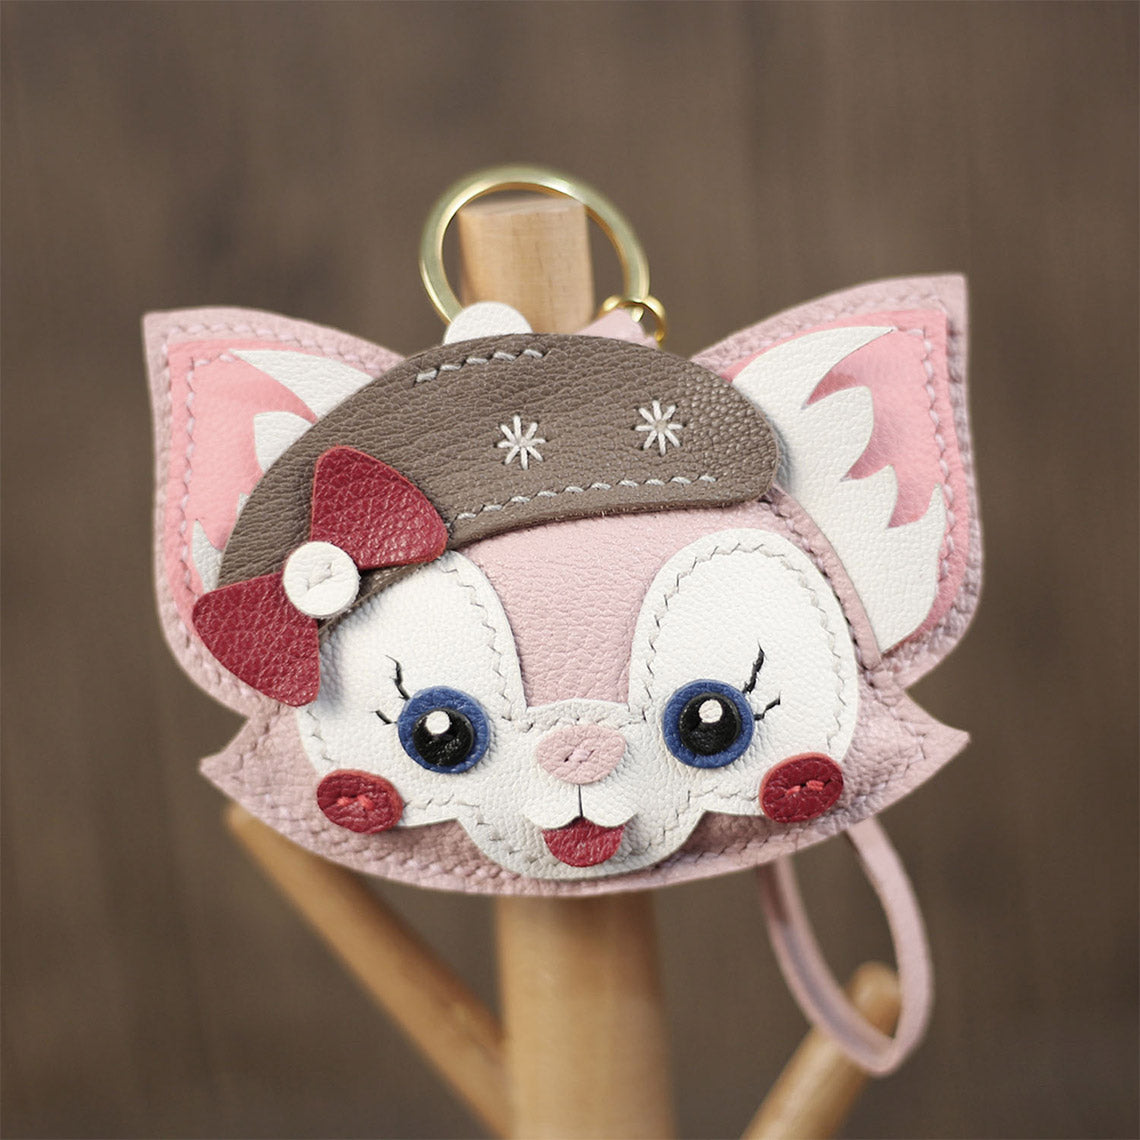 How to make a cute animal keychain - LinaBell Keychain | POPSEWING™